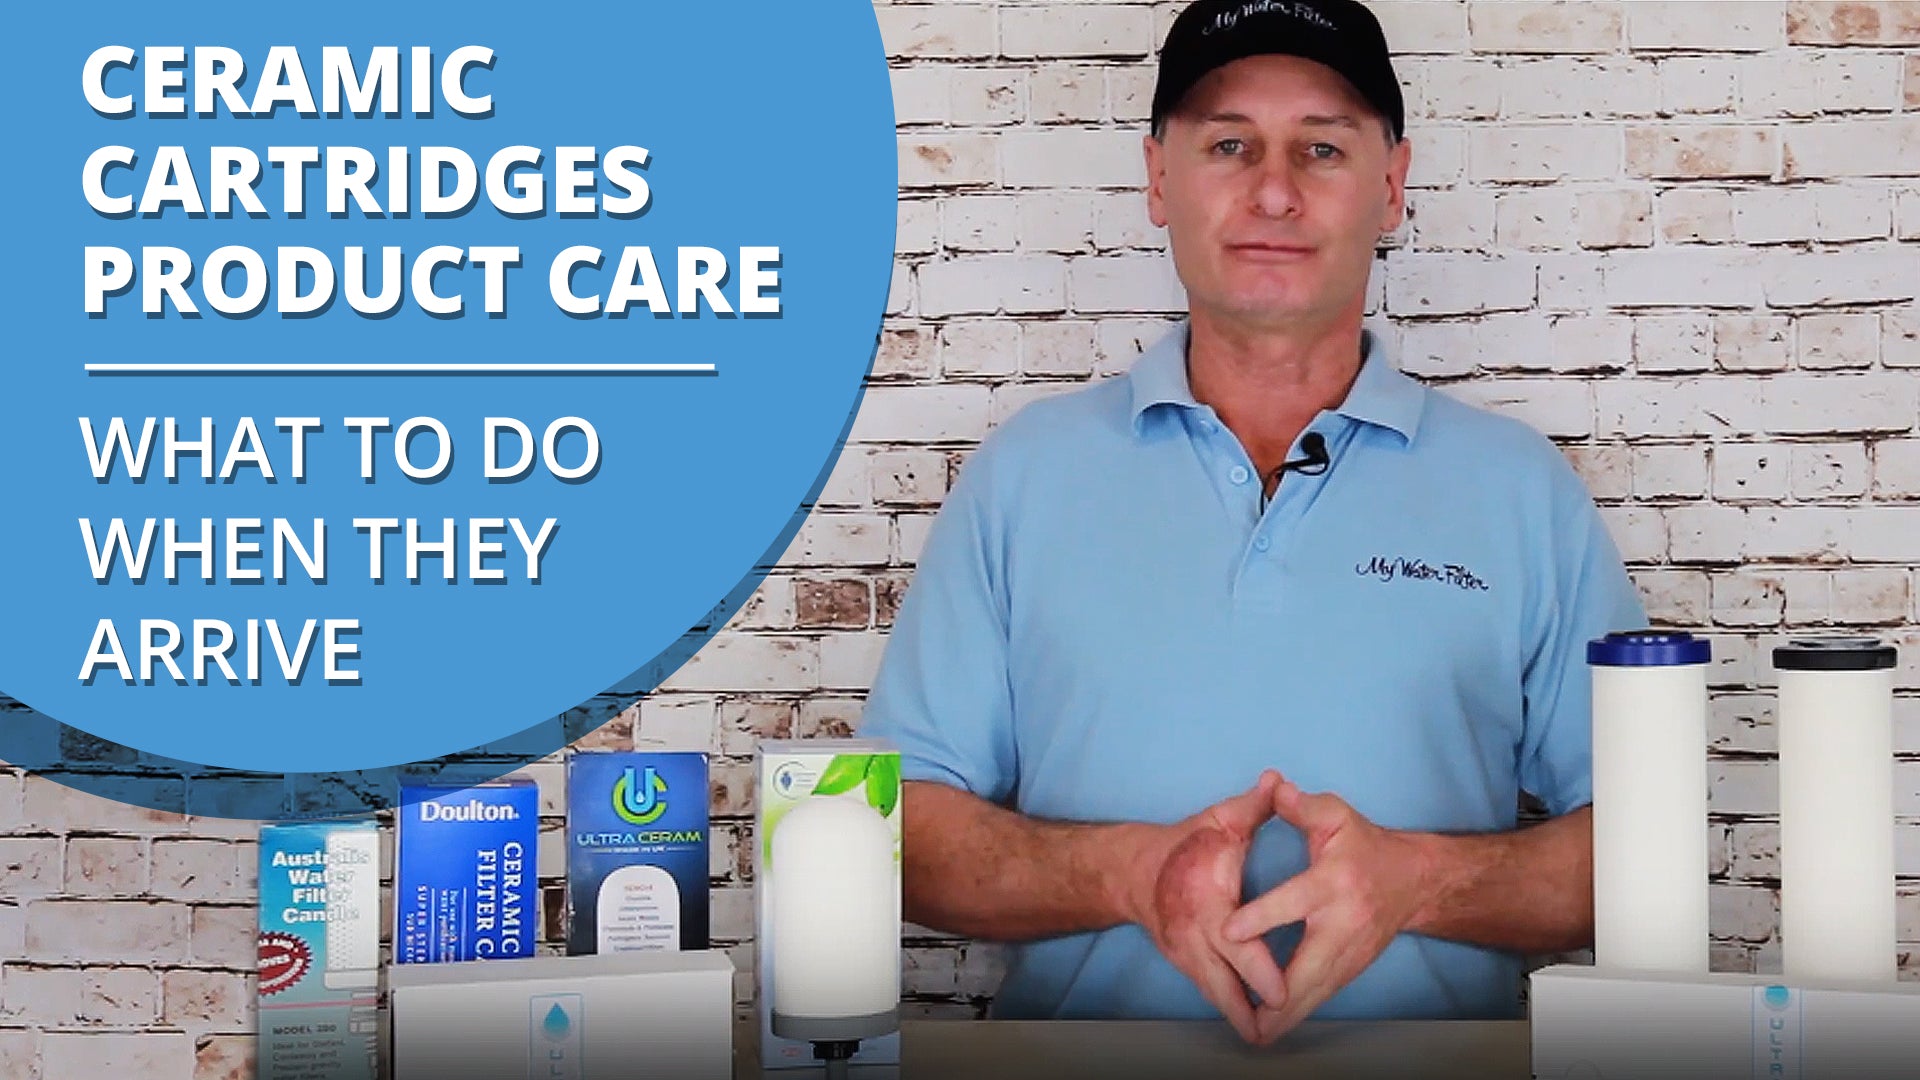 [VIDEO] What to do with your Ceramic Cartridge once it arrives - Product Care Video